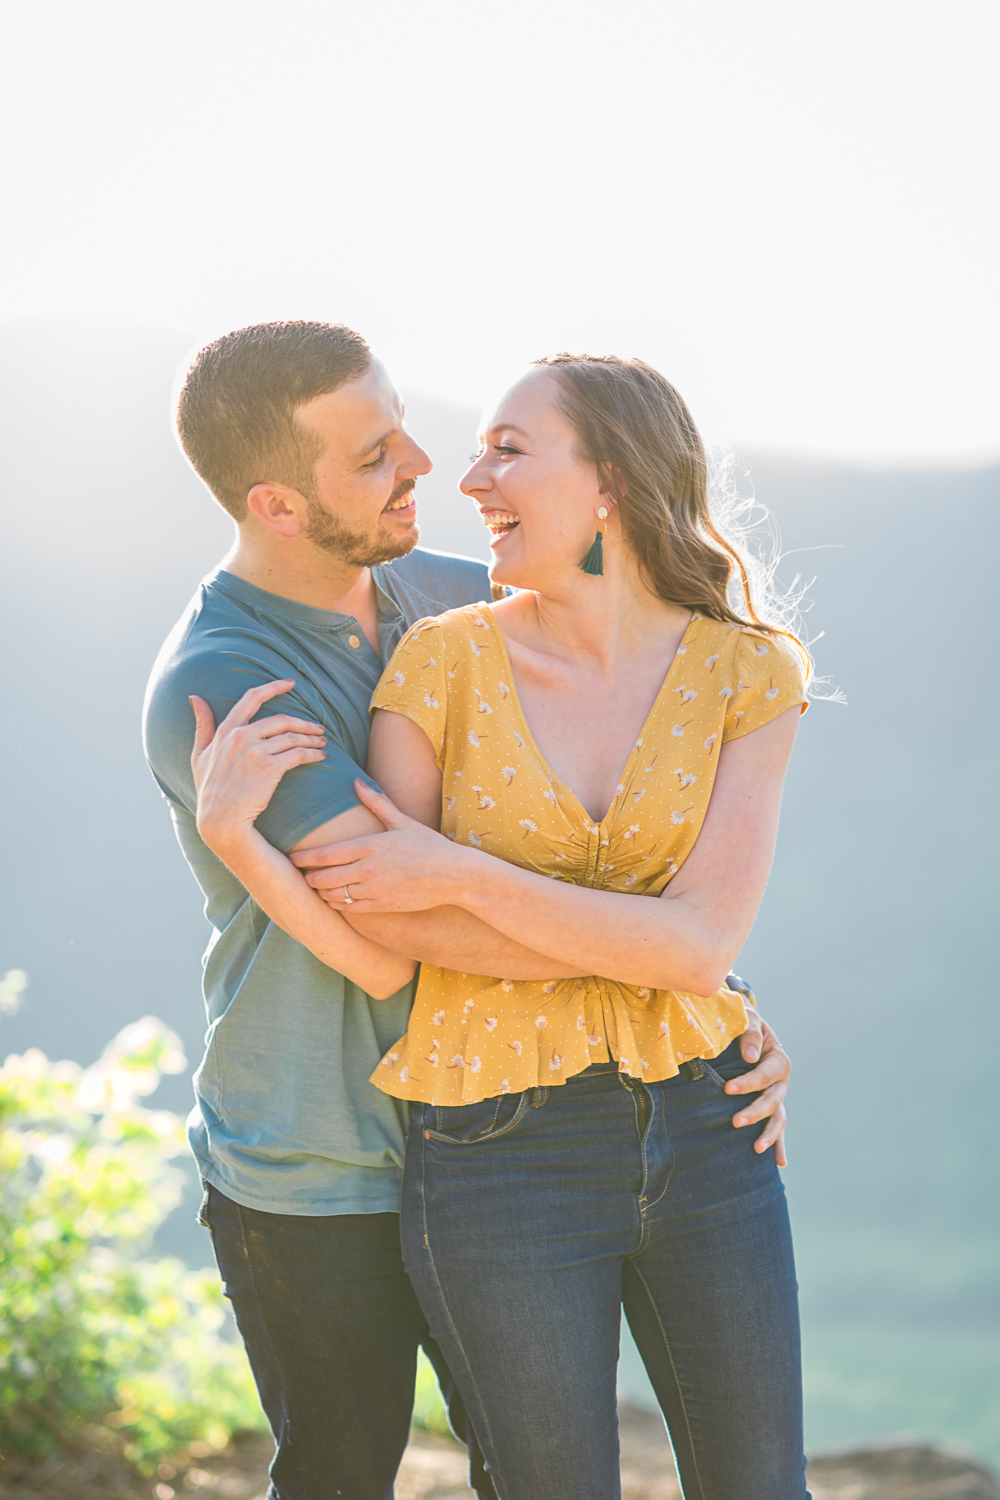 Joyful Engagement Session at Ravens Roost Overlook - Hunter and Sarah Photography